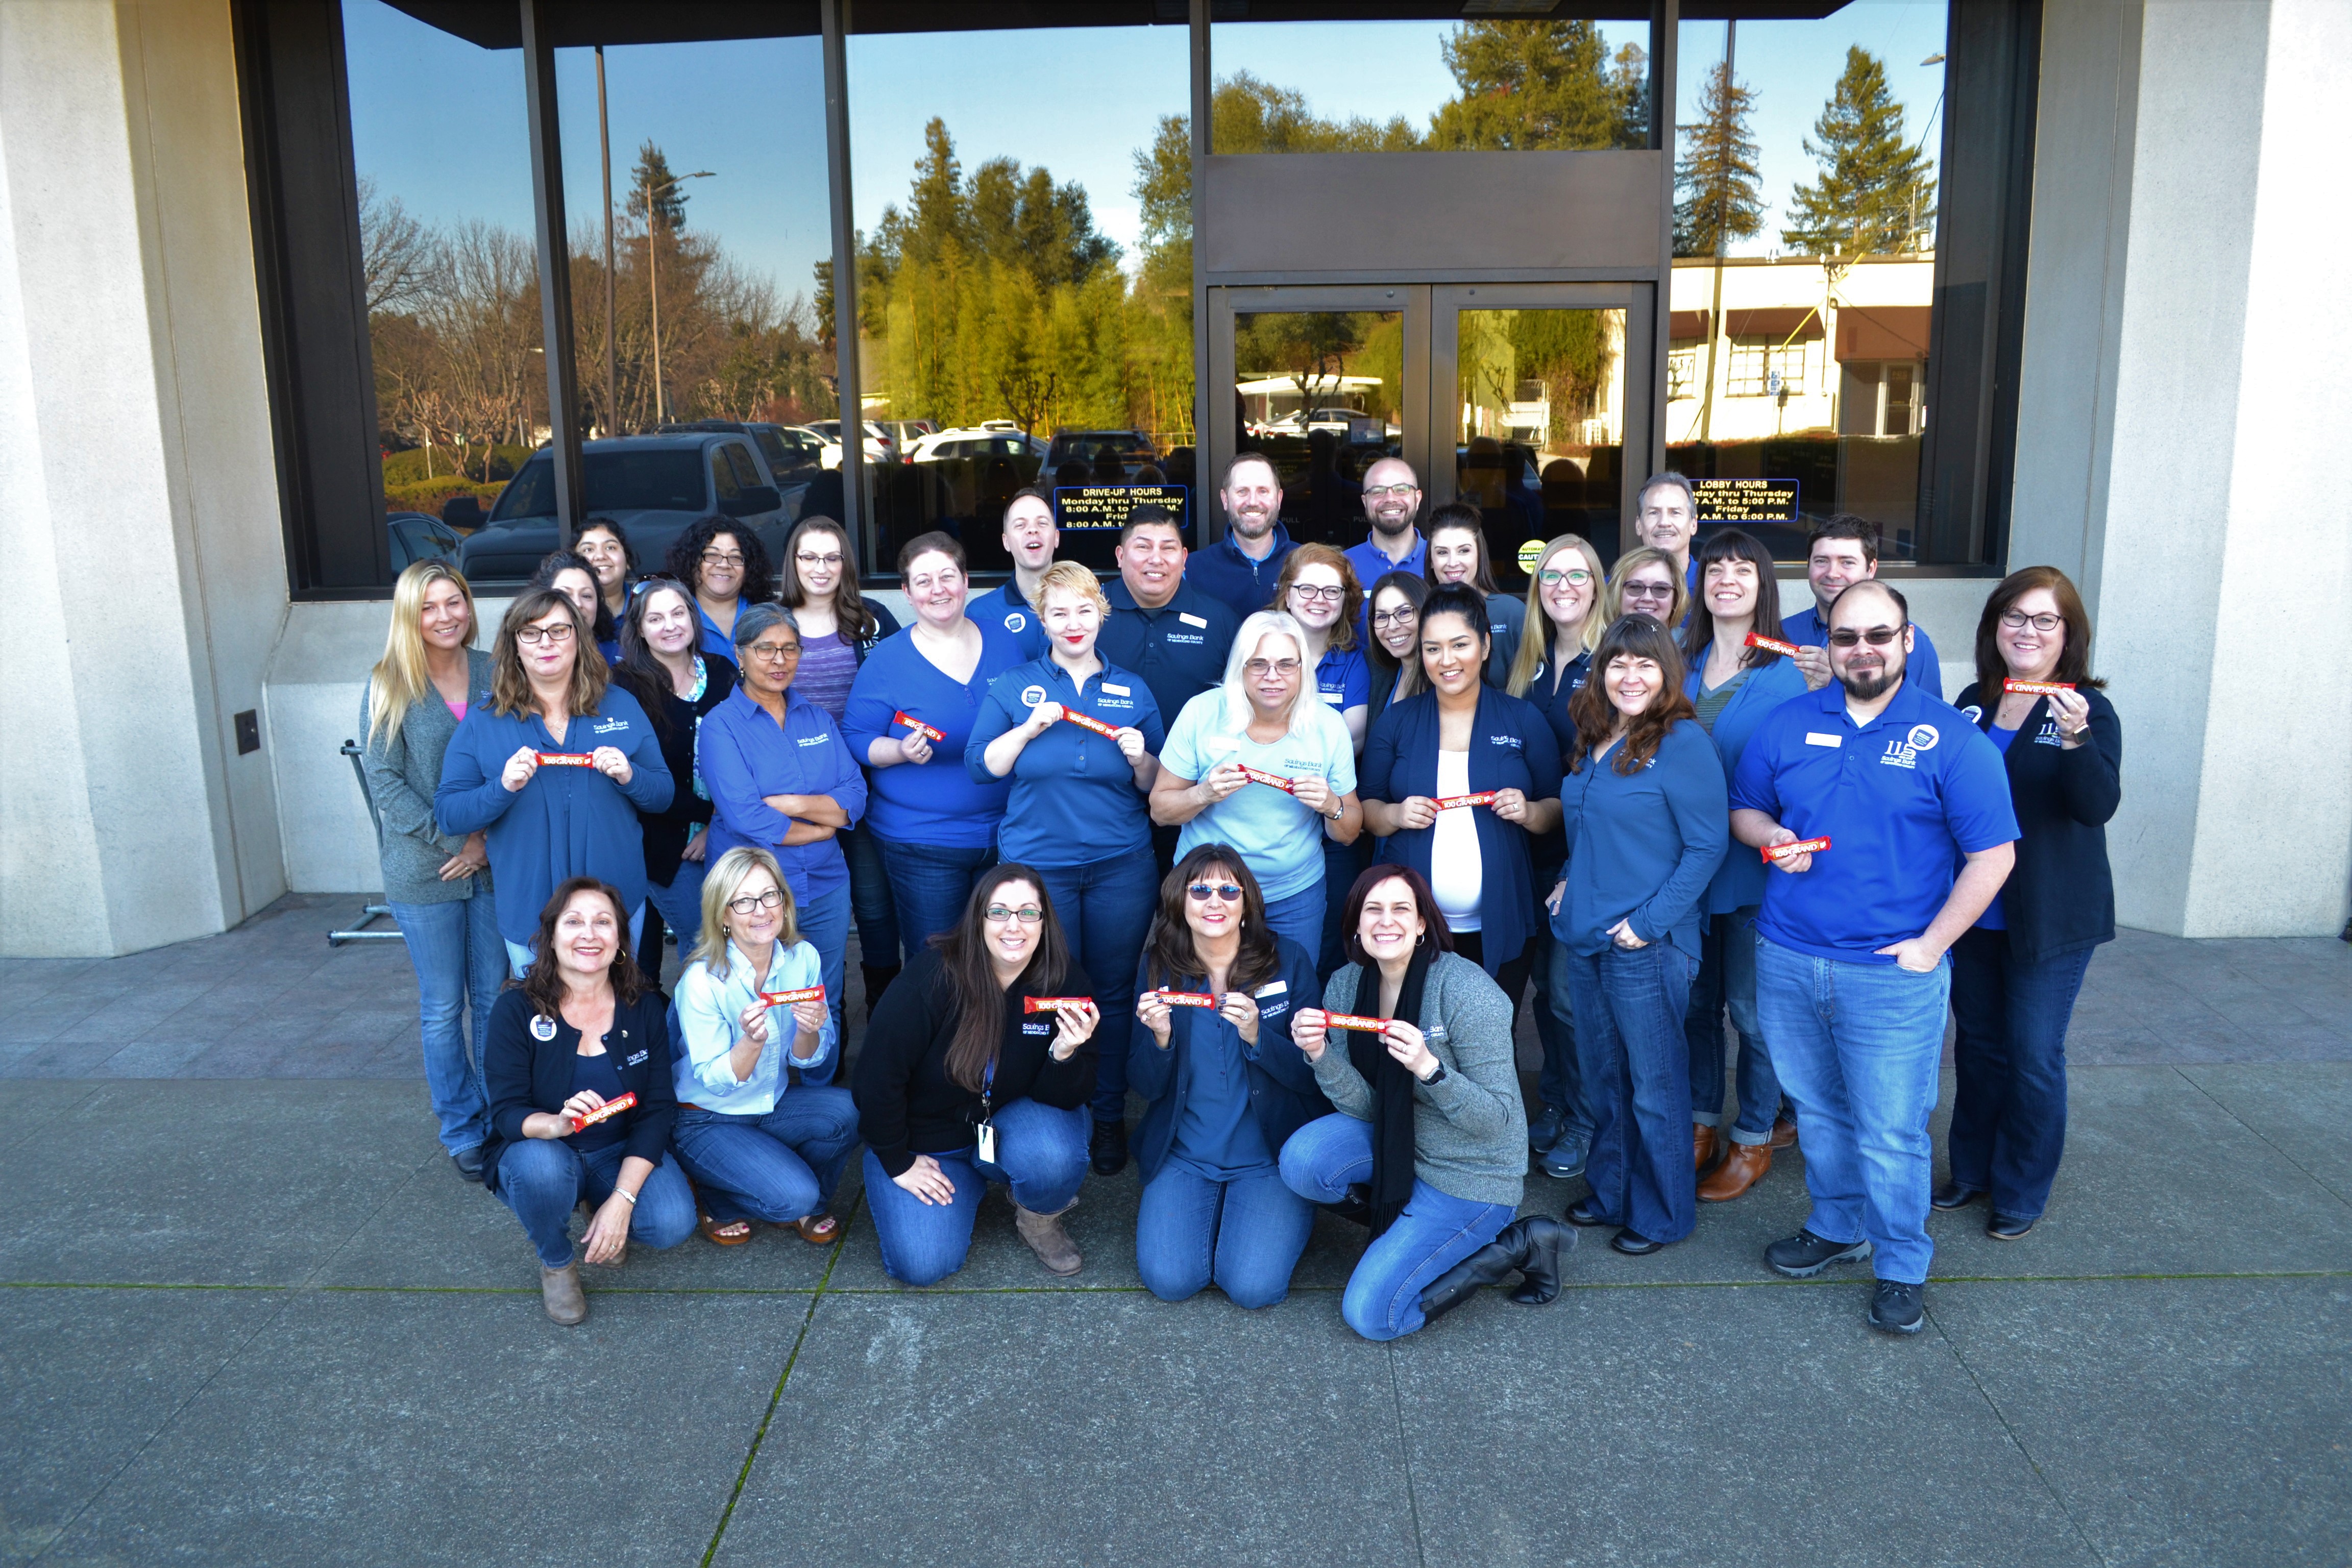 Casual for a Cause – Denim Days group photo